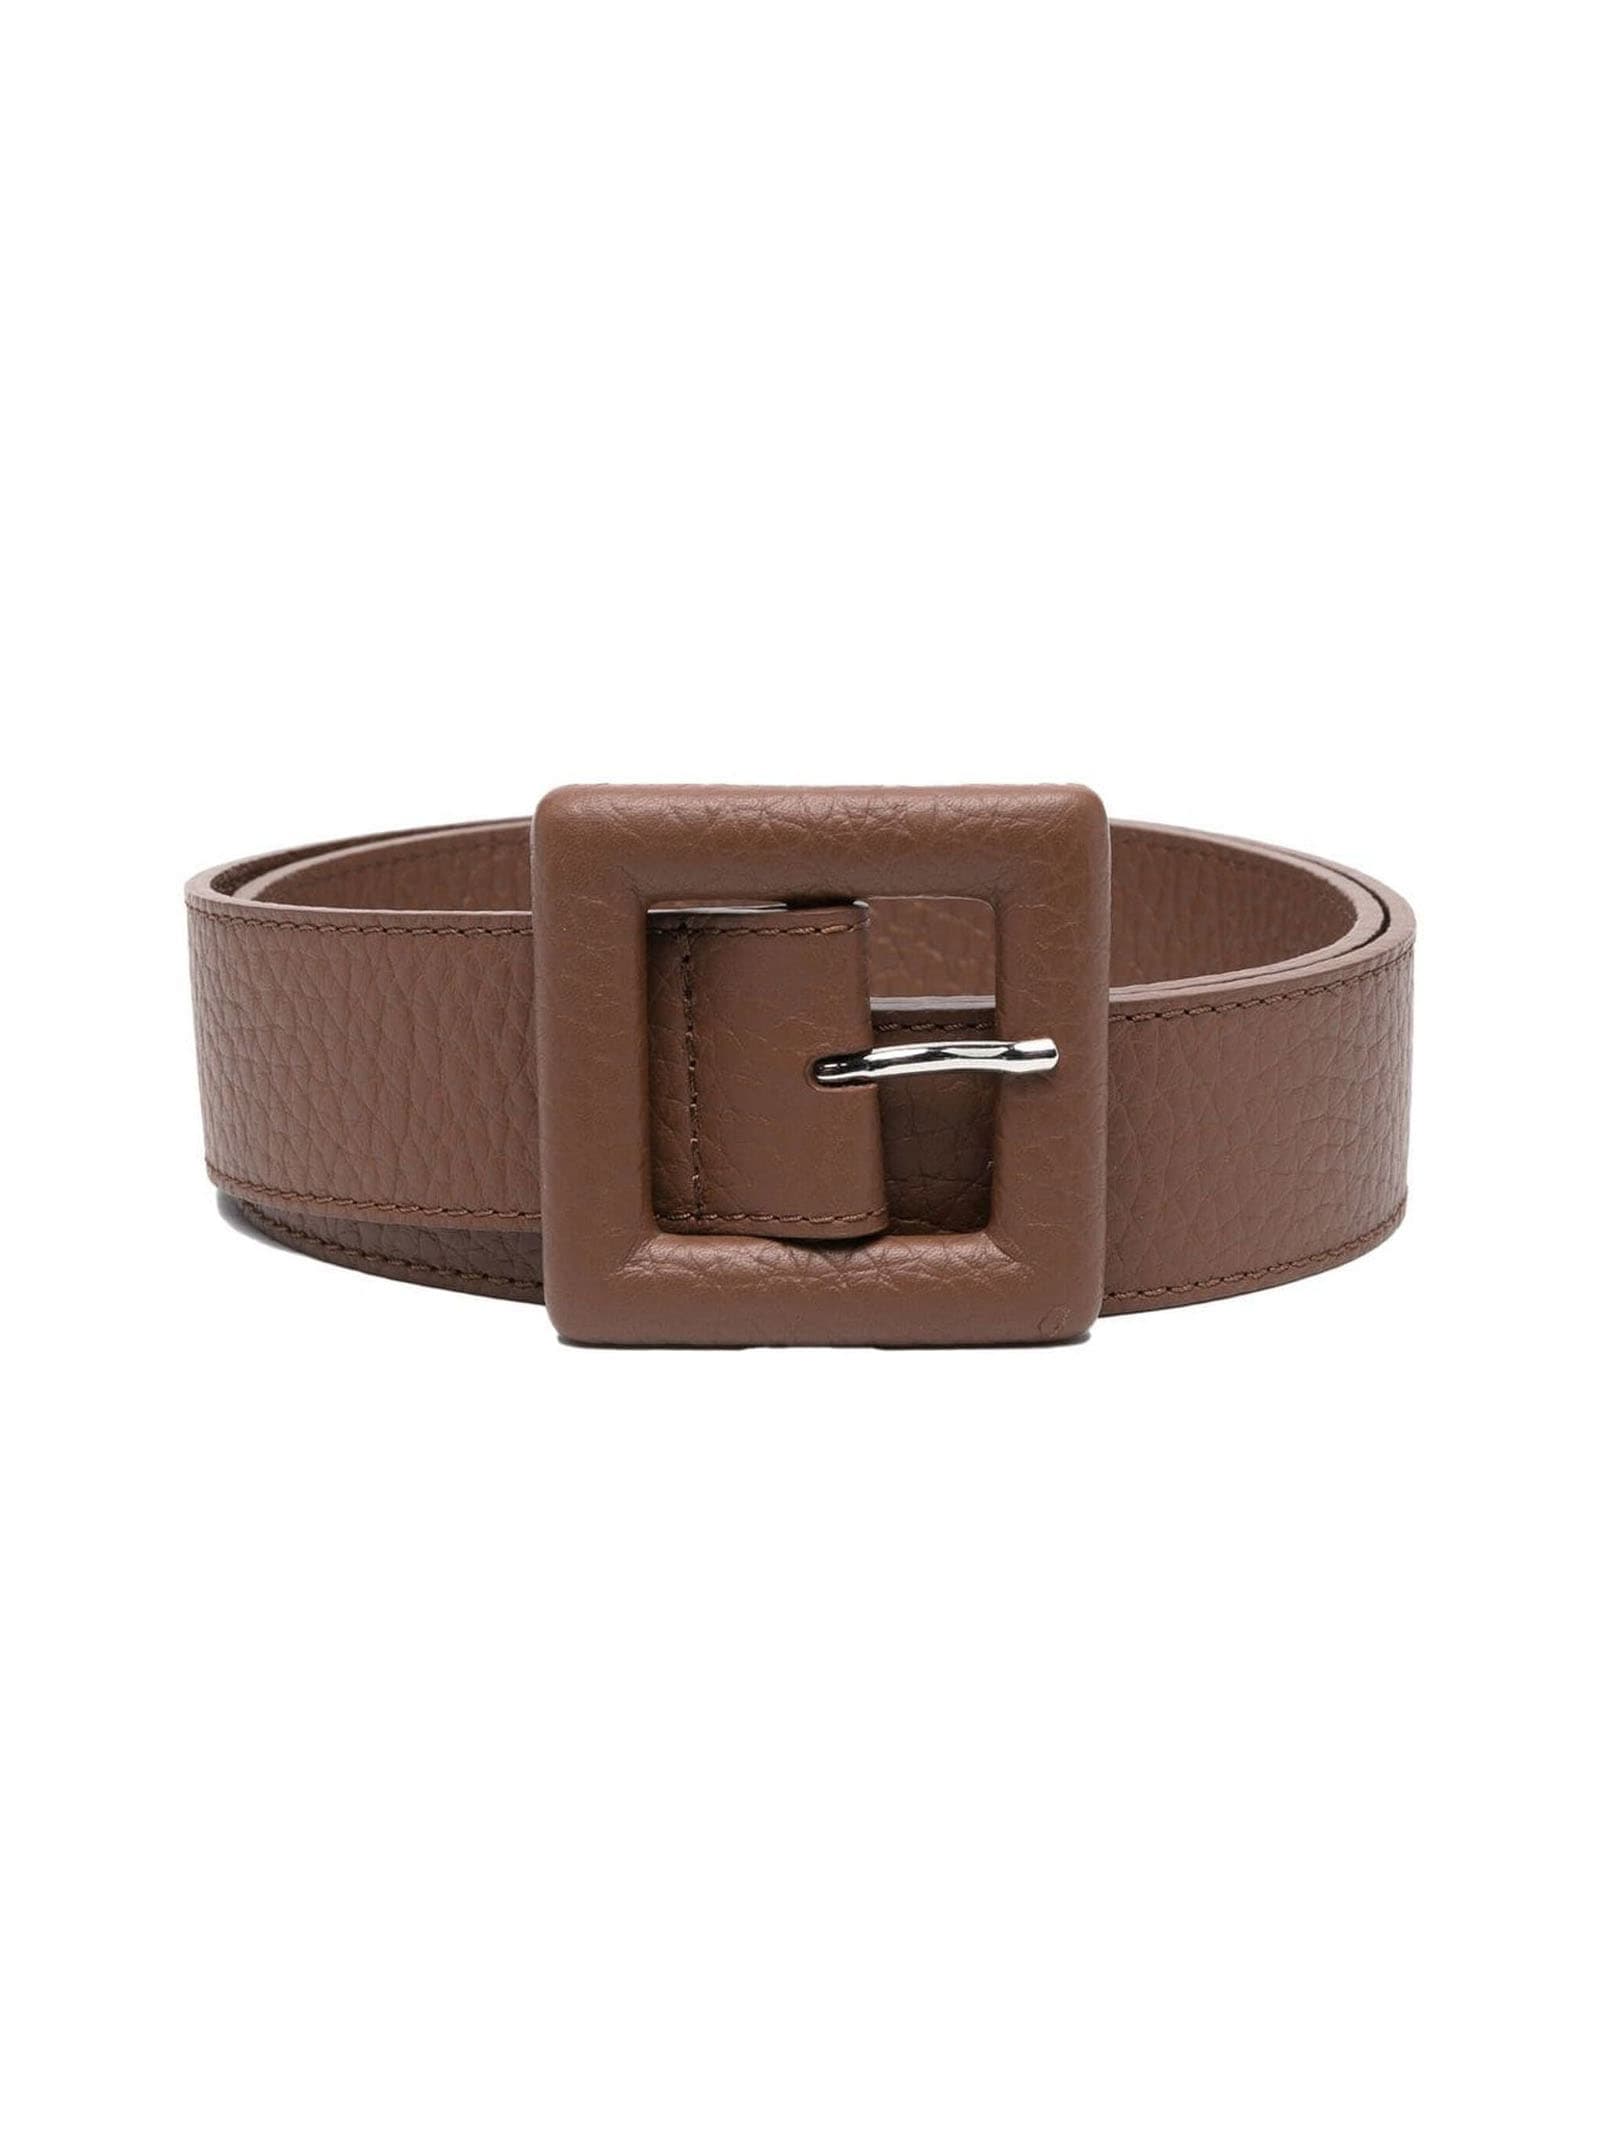 Orciani Brown Soft Leather Belt